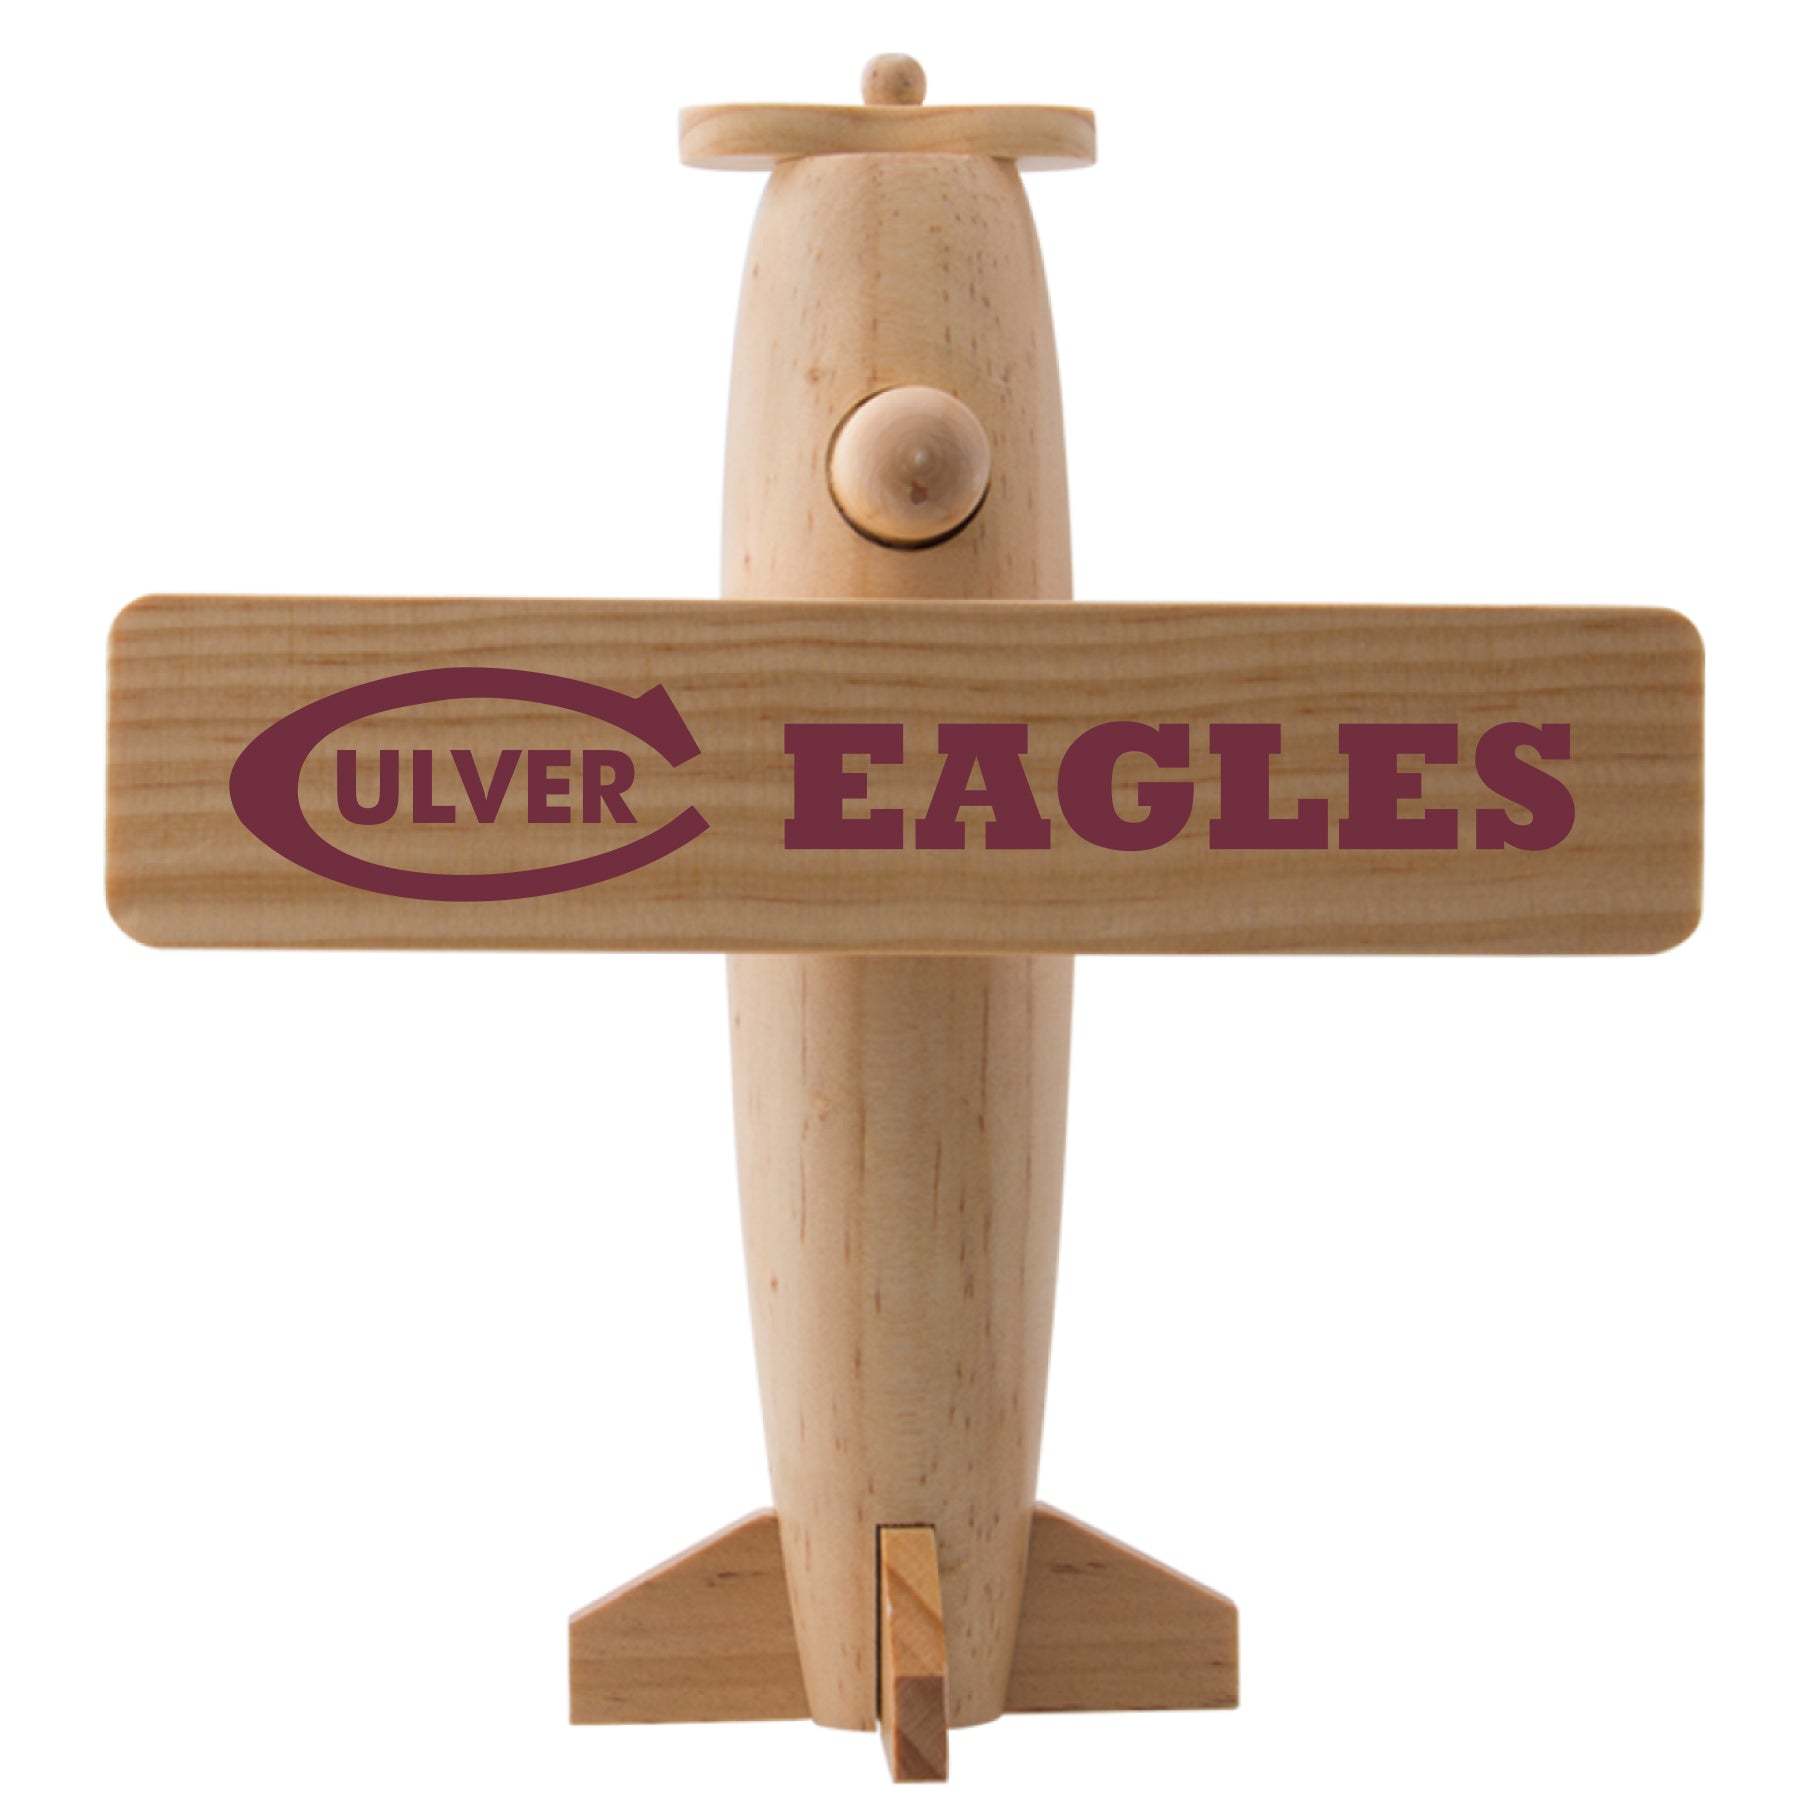 Culver Eagles Wooden Airplane